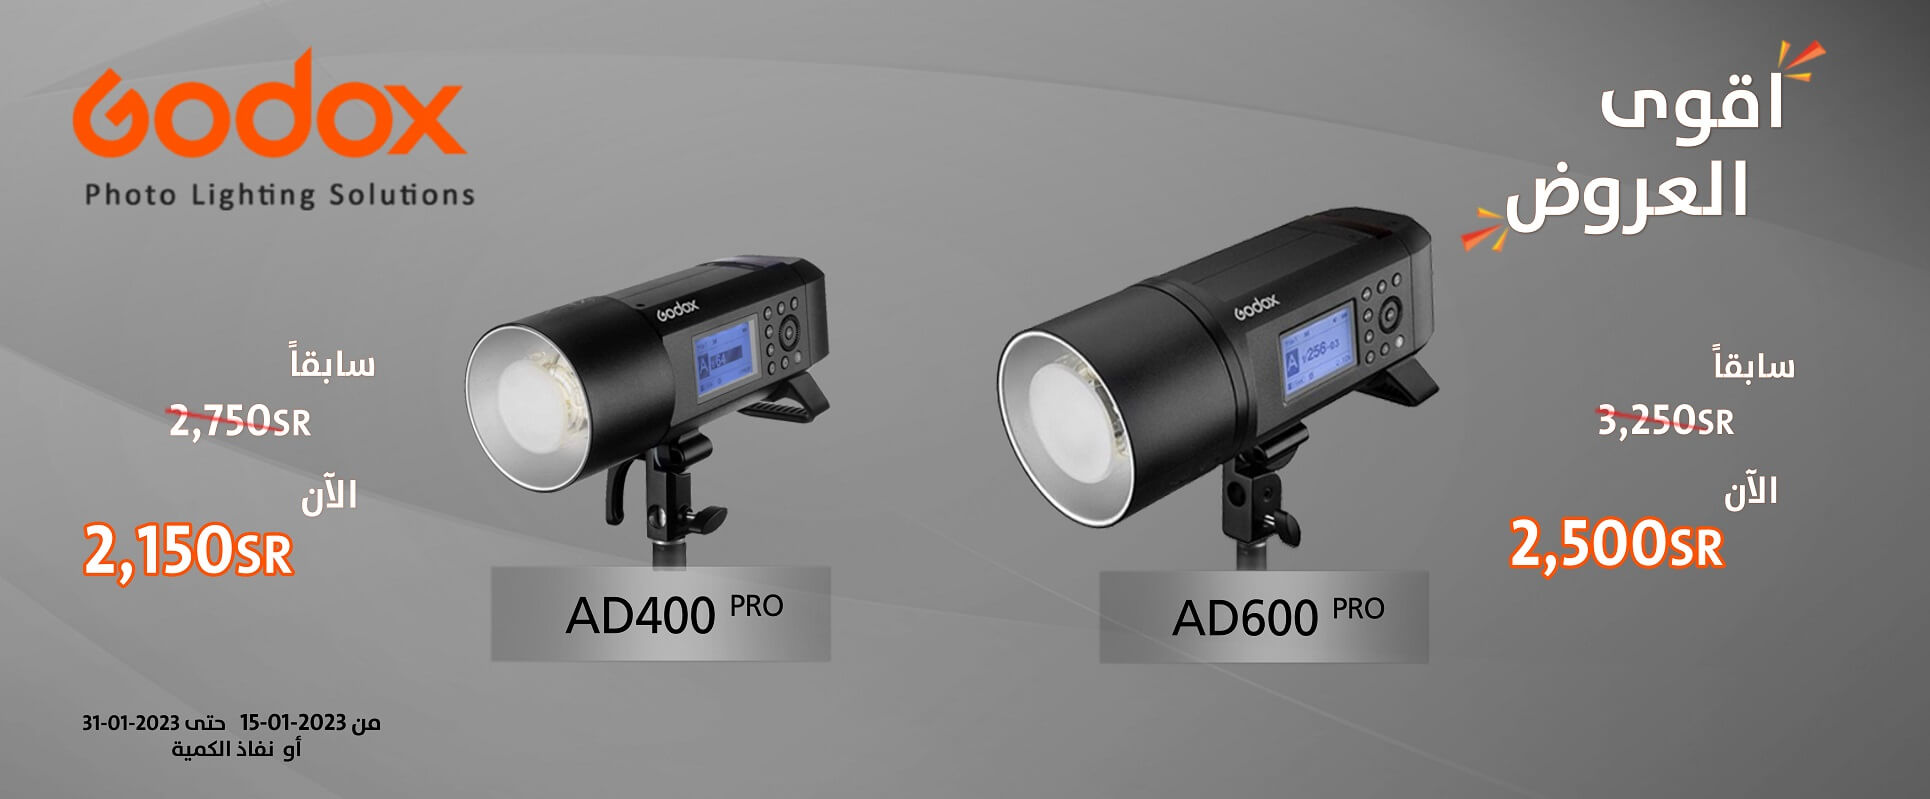 Godox AD600 PRO and AD400PRO Offers